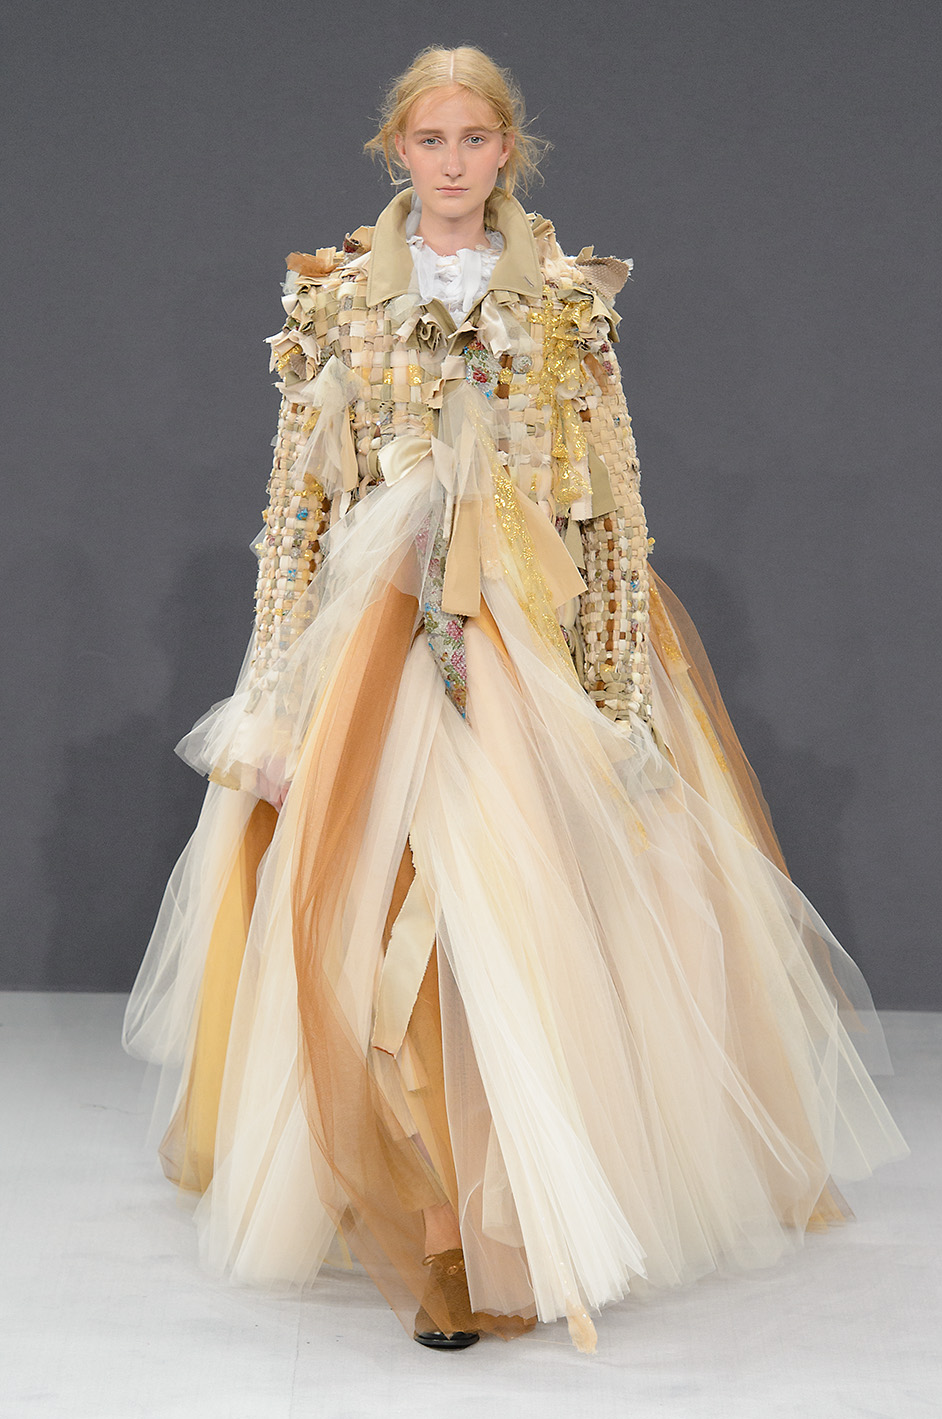 Paris Haute Couture AW 2016-2017

Viktor and Rolf